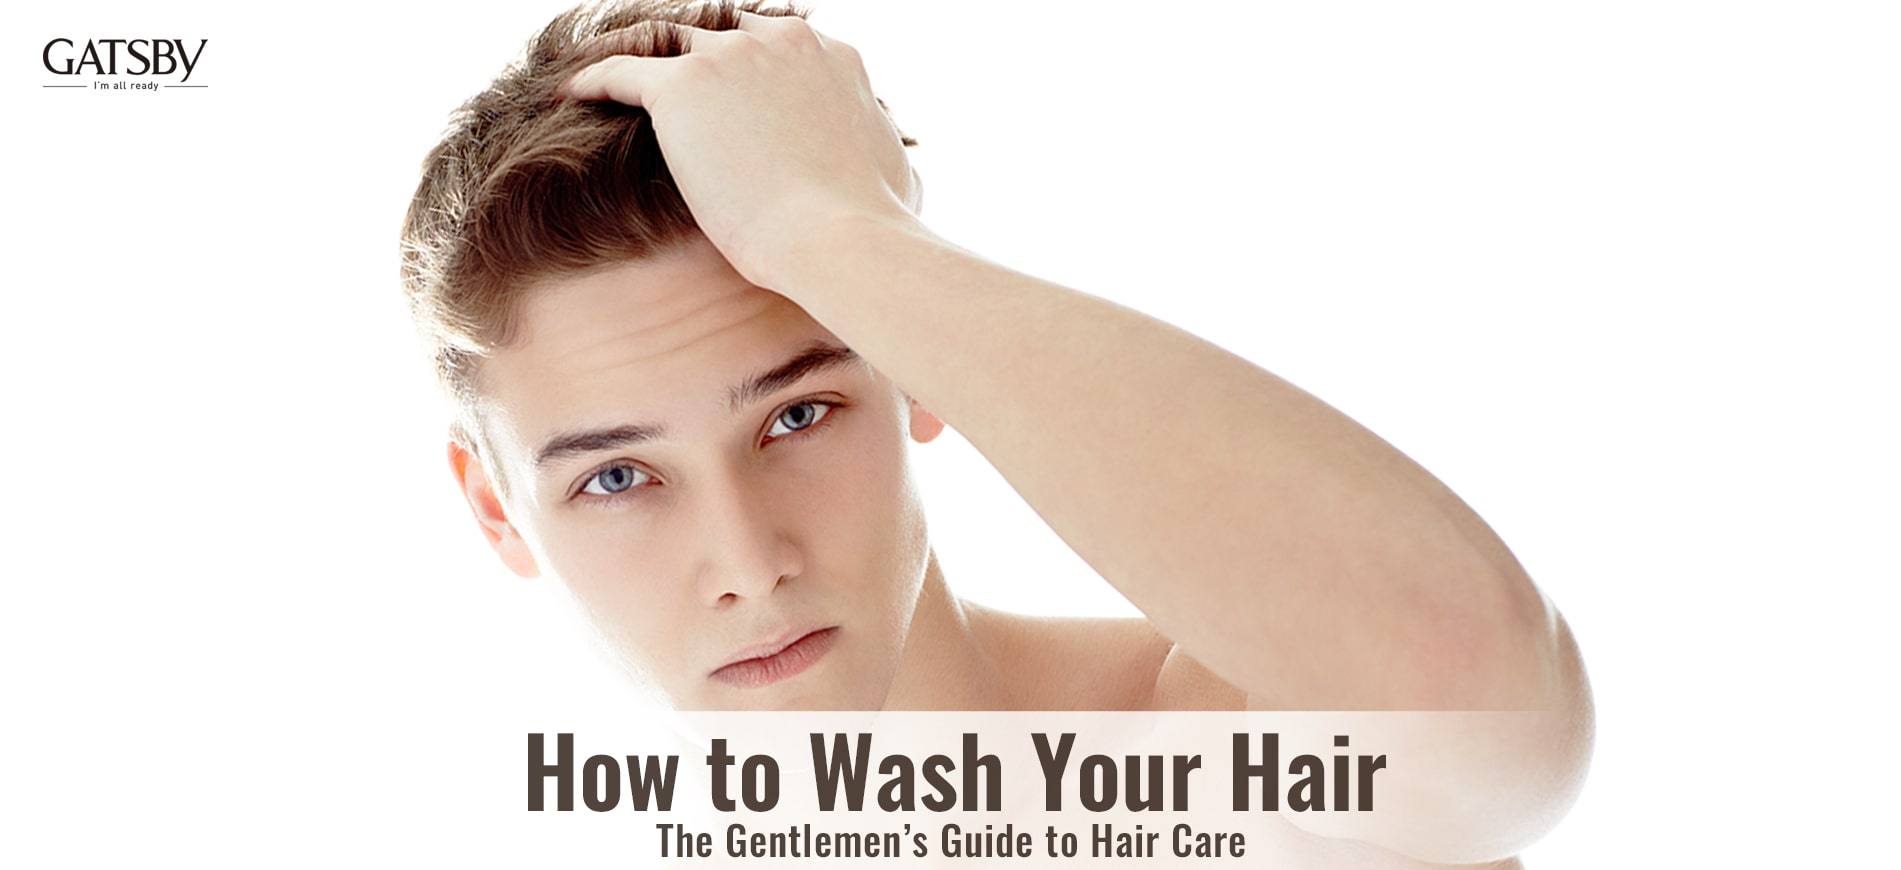 How to Wash Your Hair Properly in 3 Easy Steps by GATSBY